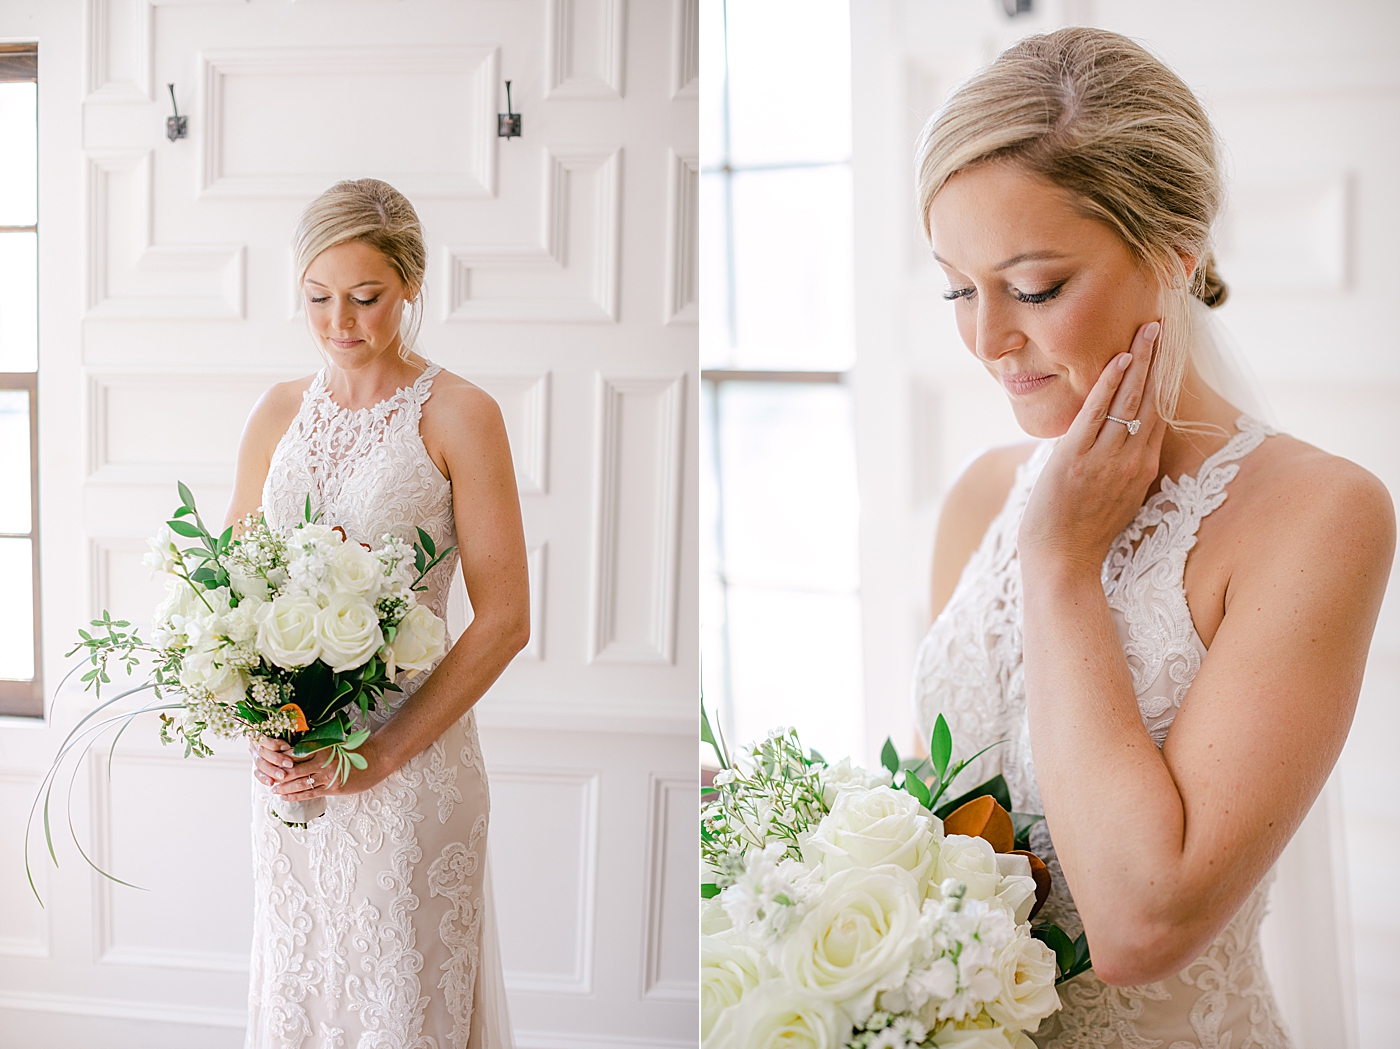 Bridal portraits | Image by Hope Helmuth Photography